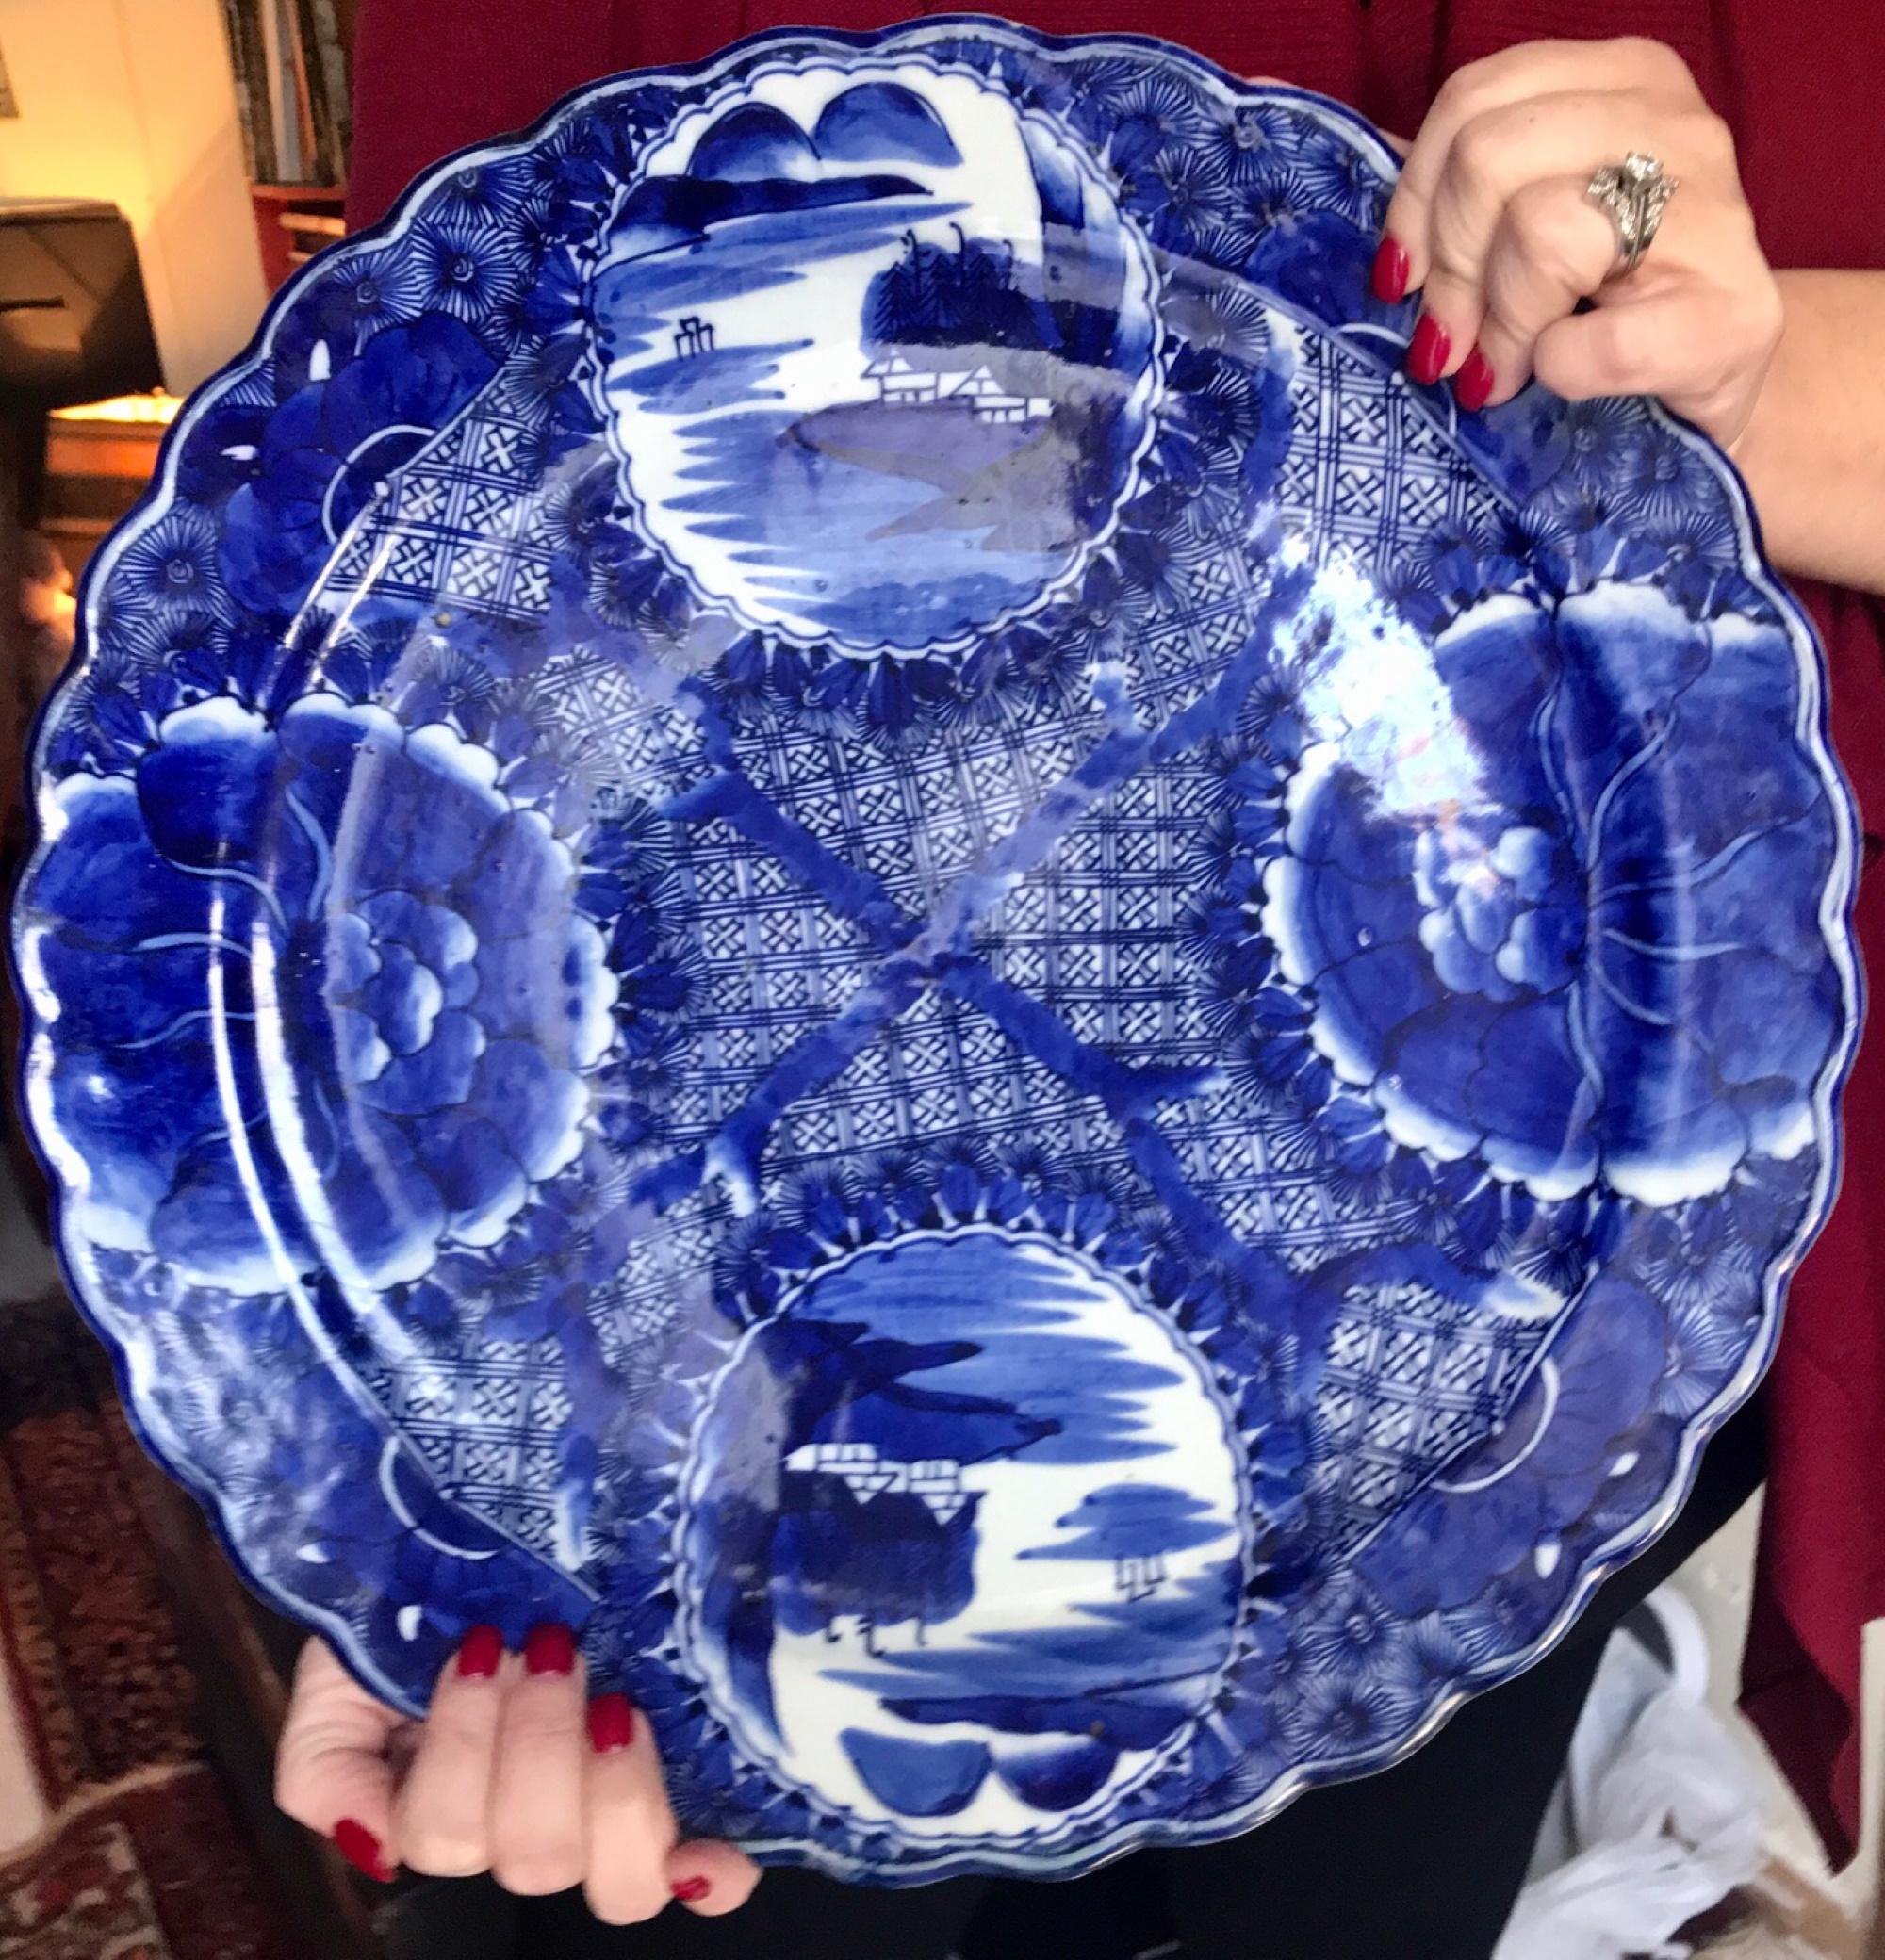 This large, beautiful and bold blue and white platter is Japanese Imari from the Edo period (18th century). This impressive early porcelain Imari ware is saturated in rich cobalt blue underglaze hand painted in an unusual cross pattern. It features